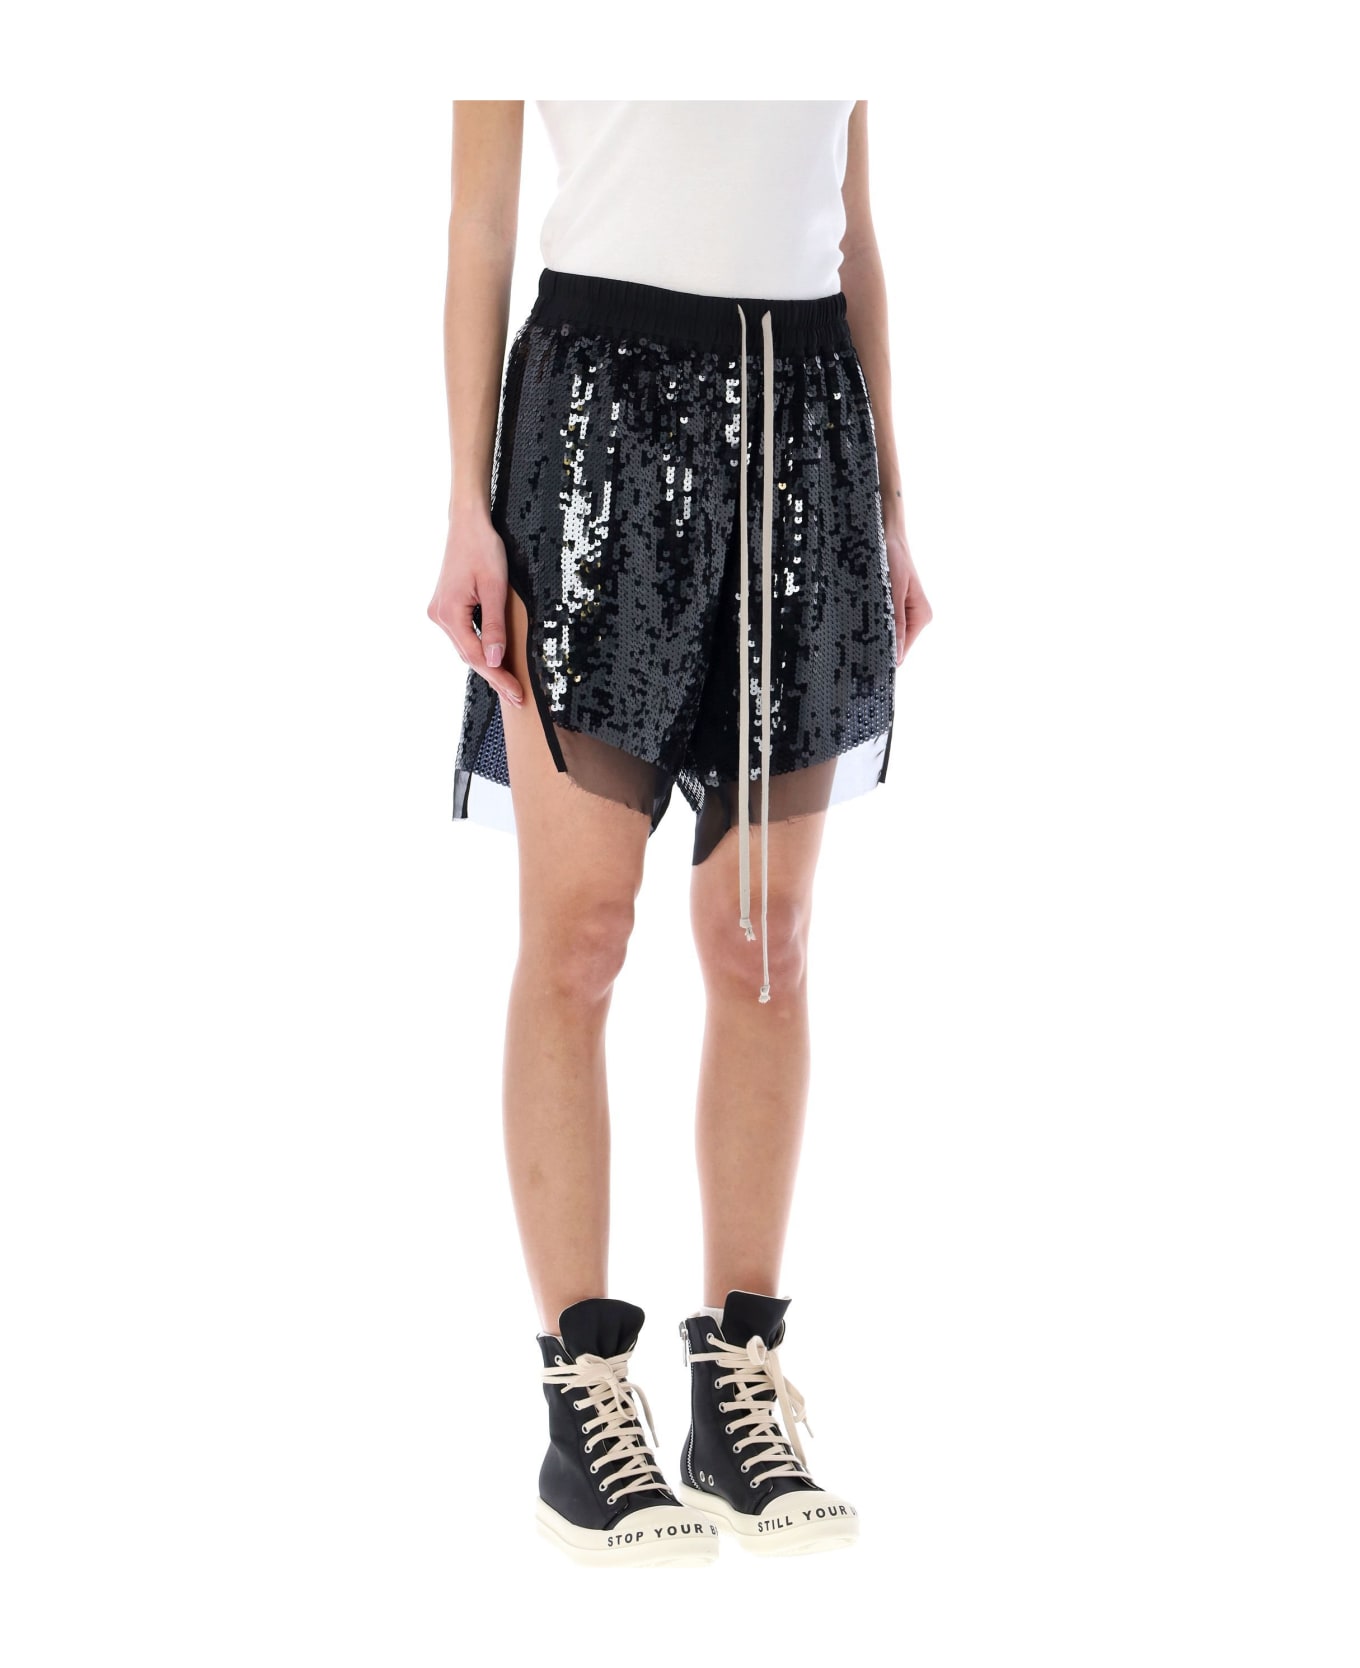 Rick Owens Boxers In Sequin Embroidered Silk Chiffon - BLACK BLACK